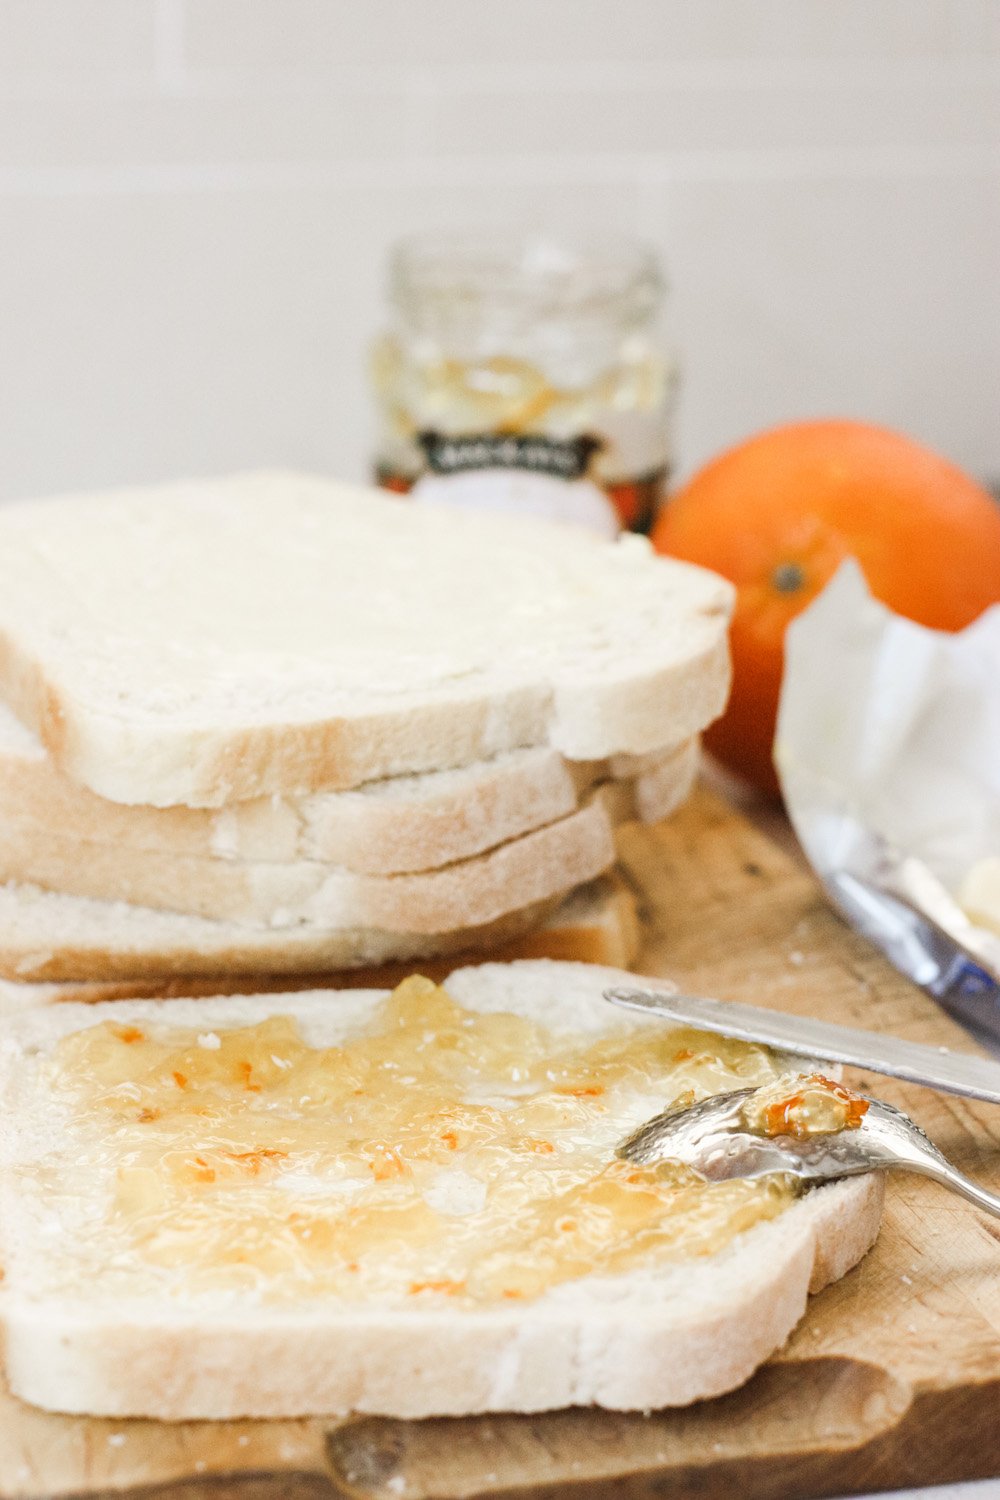 Marmalade sandwiches for Marmalade bread and butter pudding